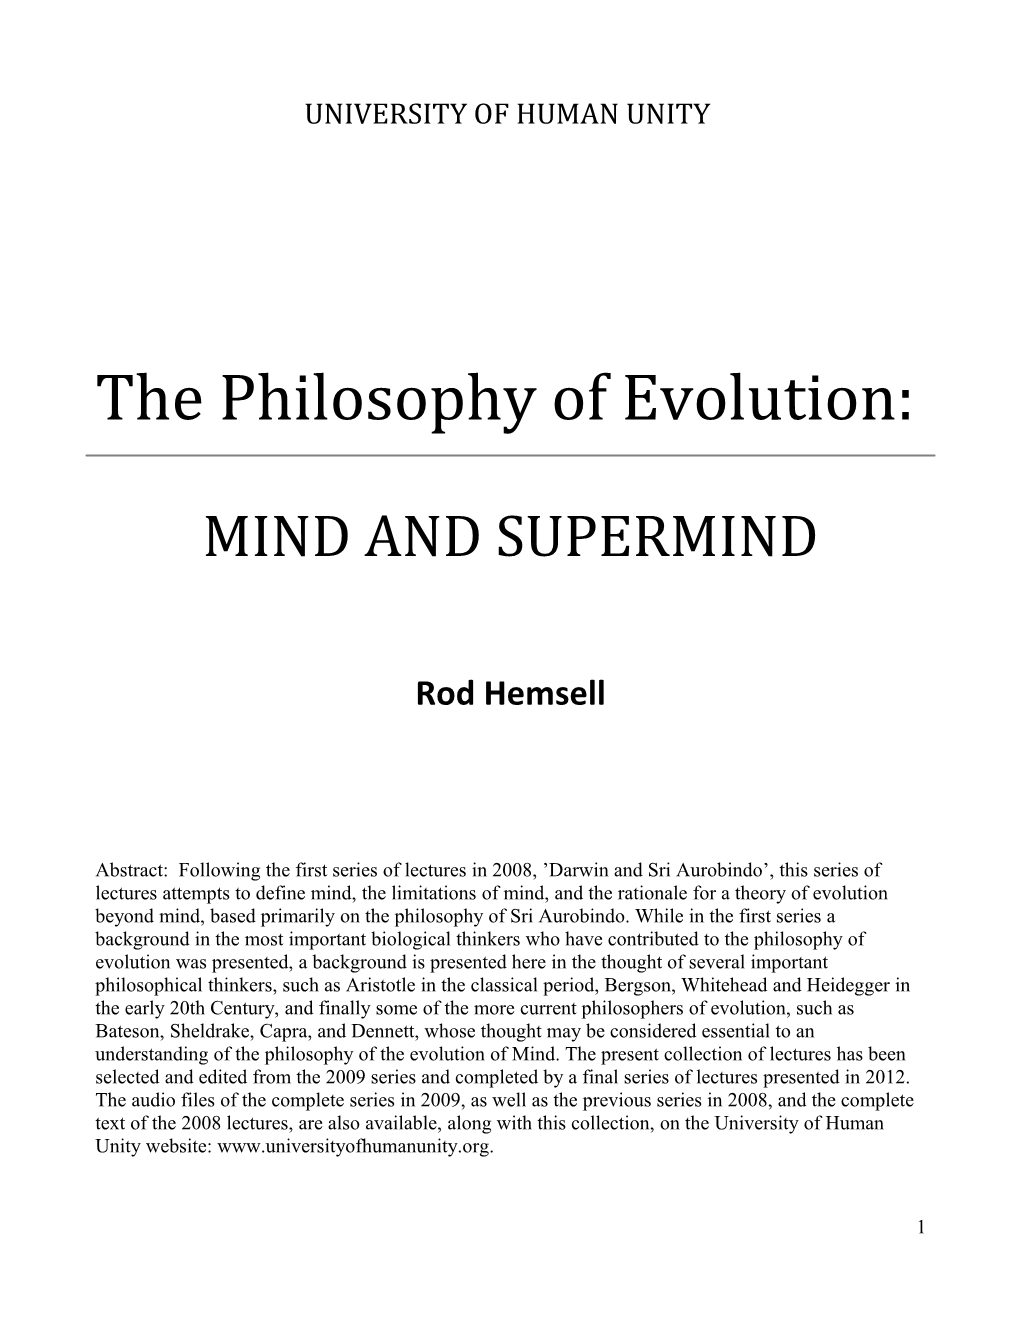 The Philosophy of Evolution Part 2